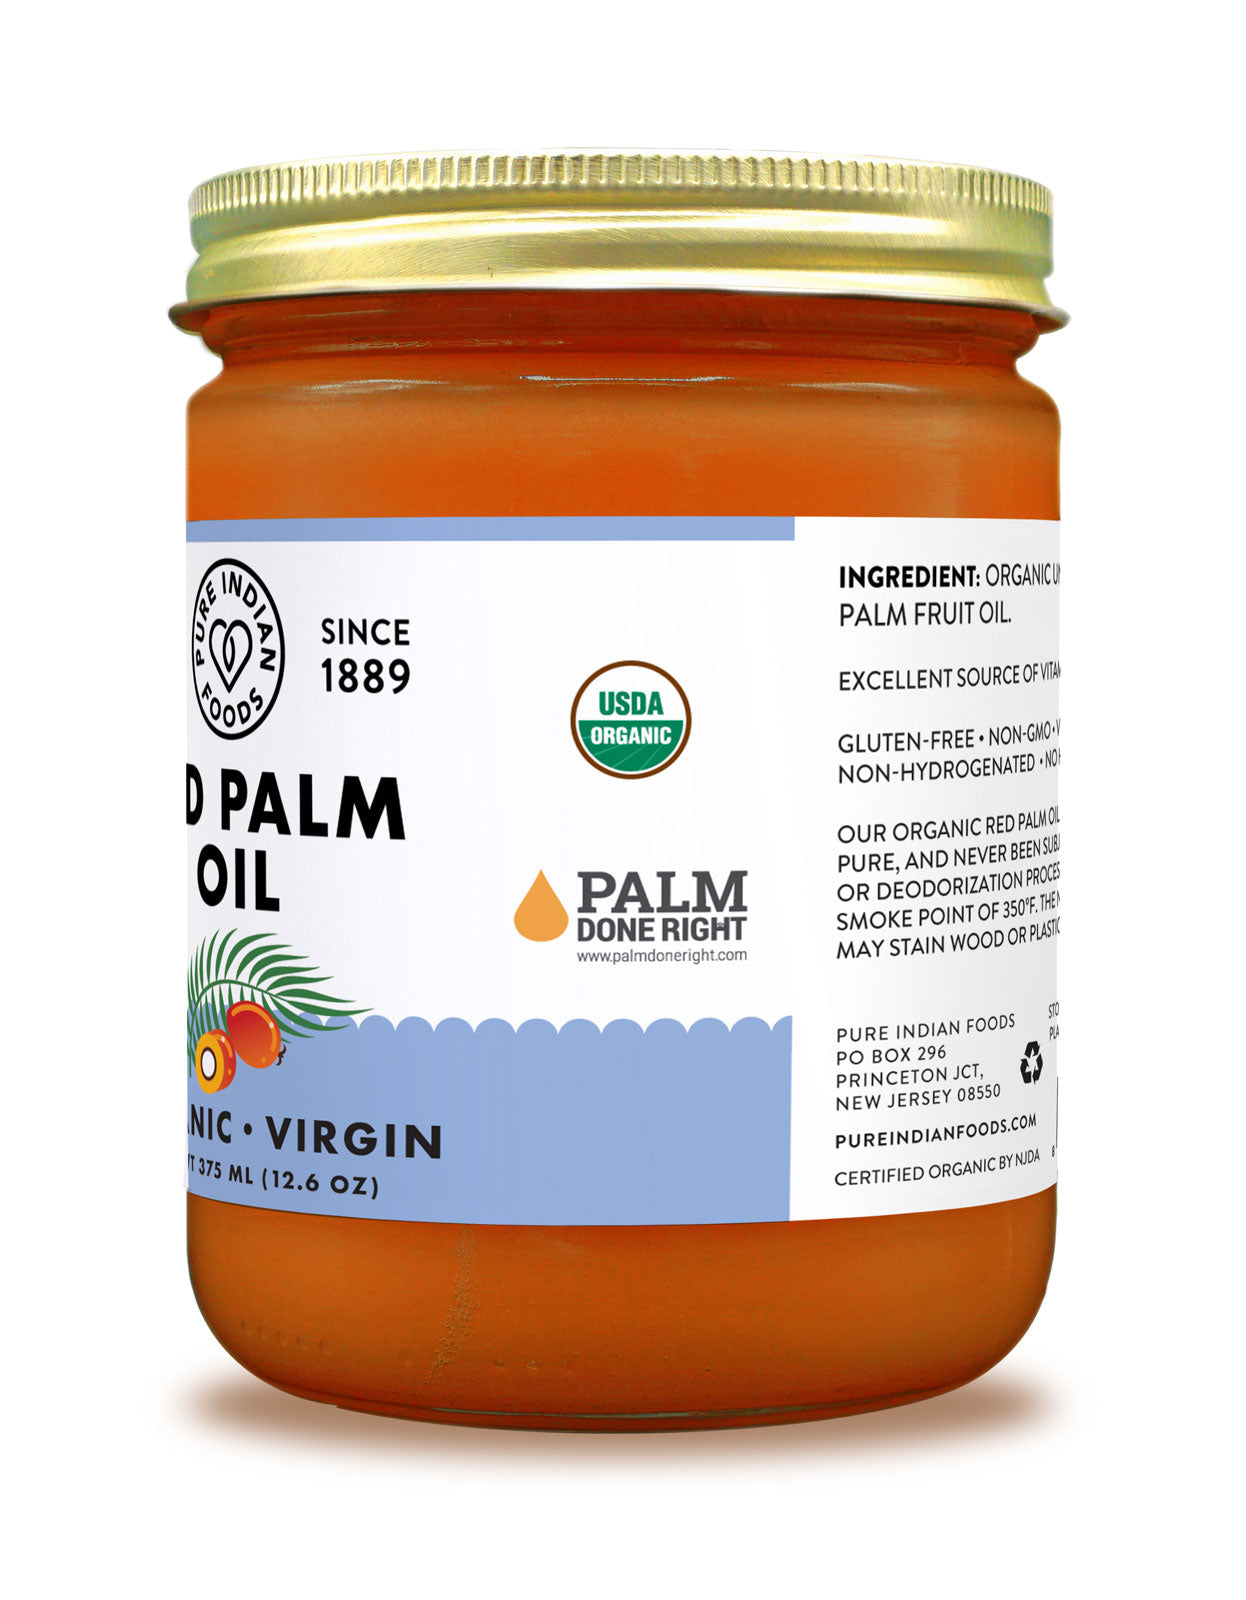 Side label on a jar of organic red palm oil from Pure Indian Foods.